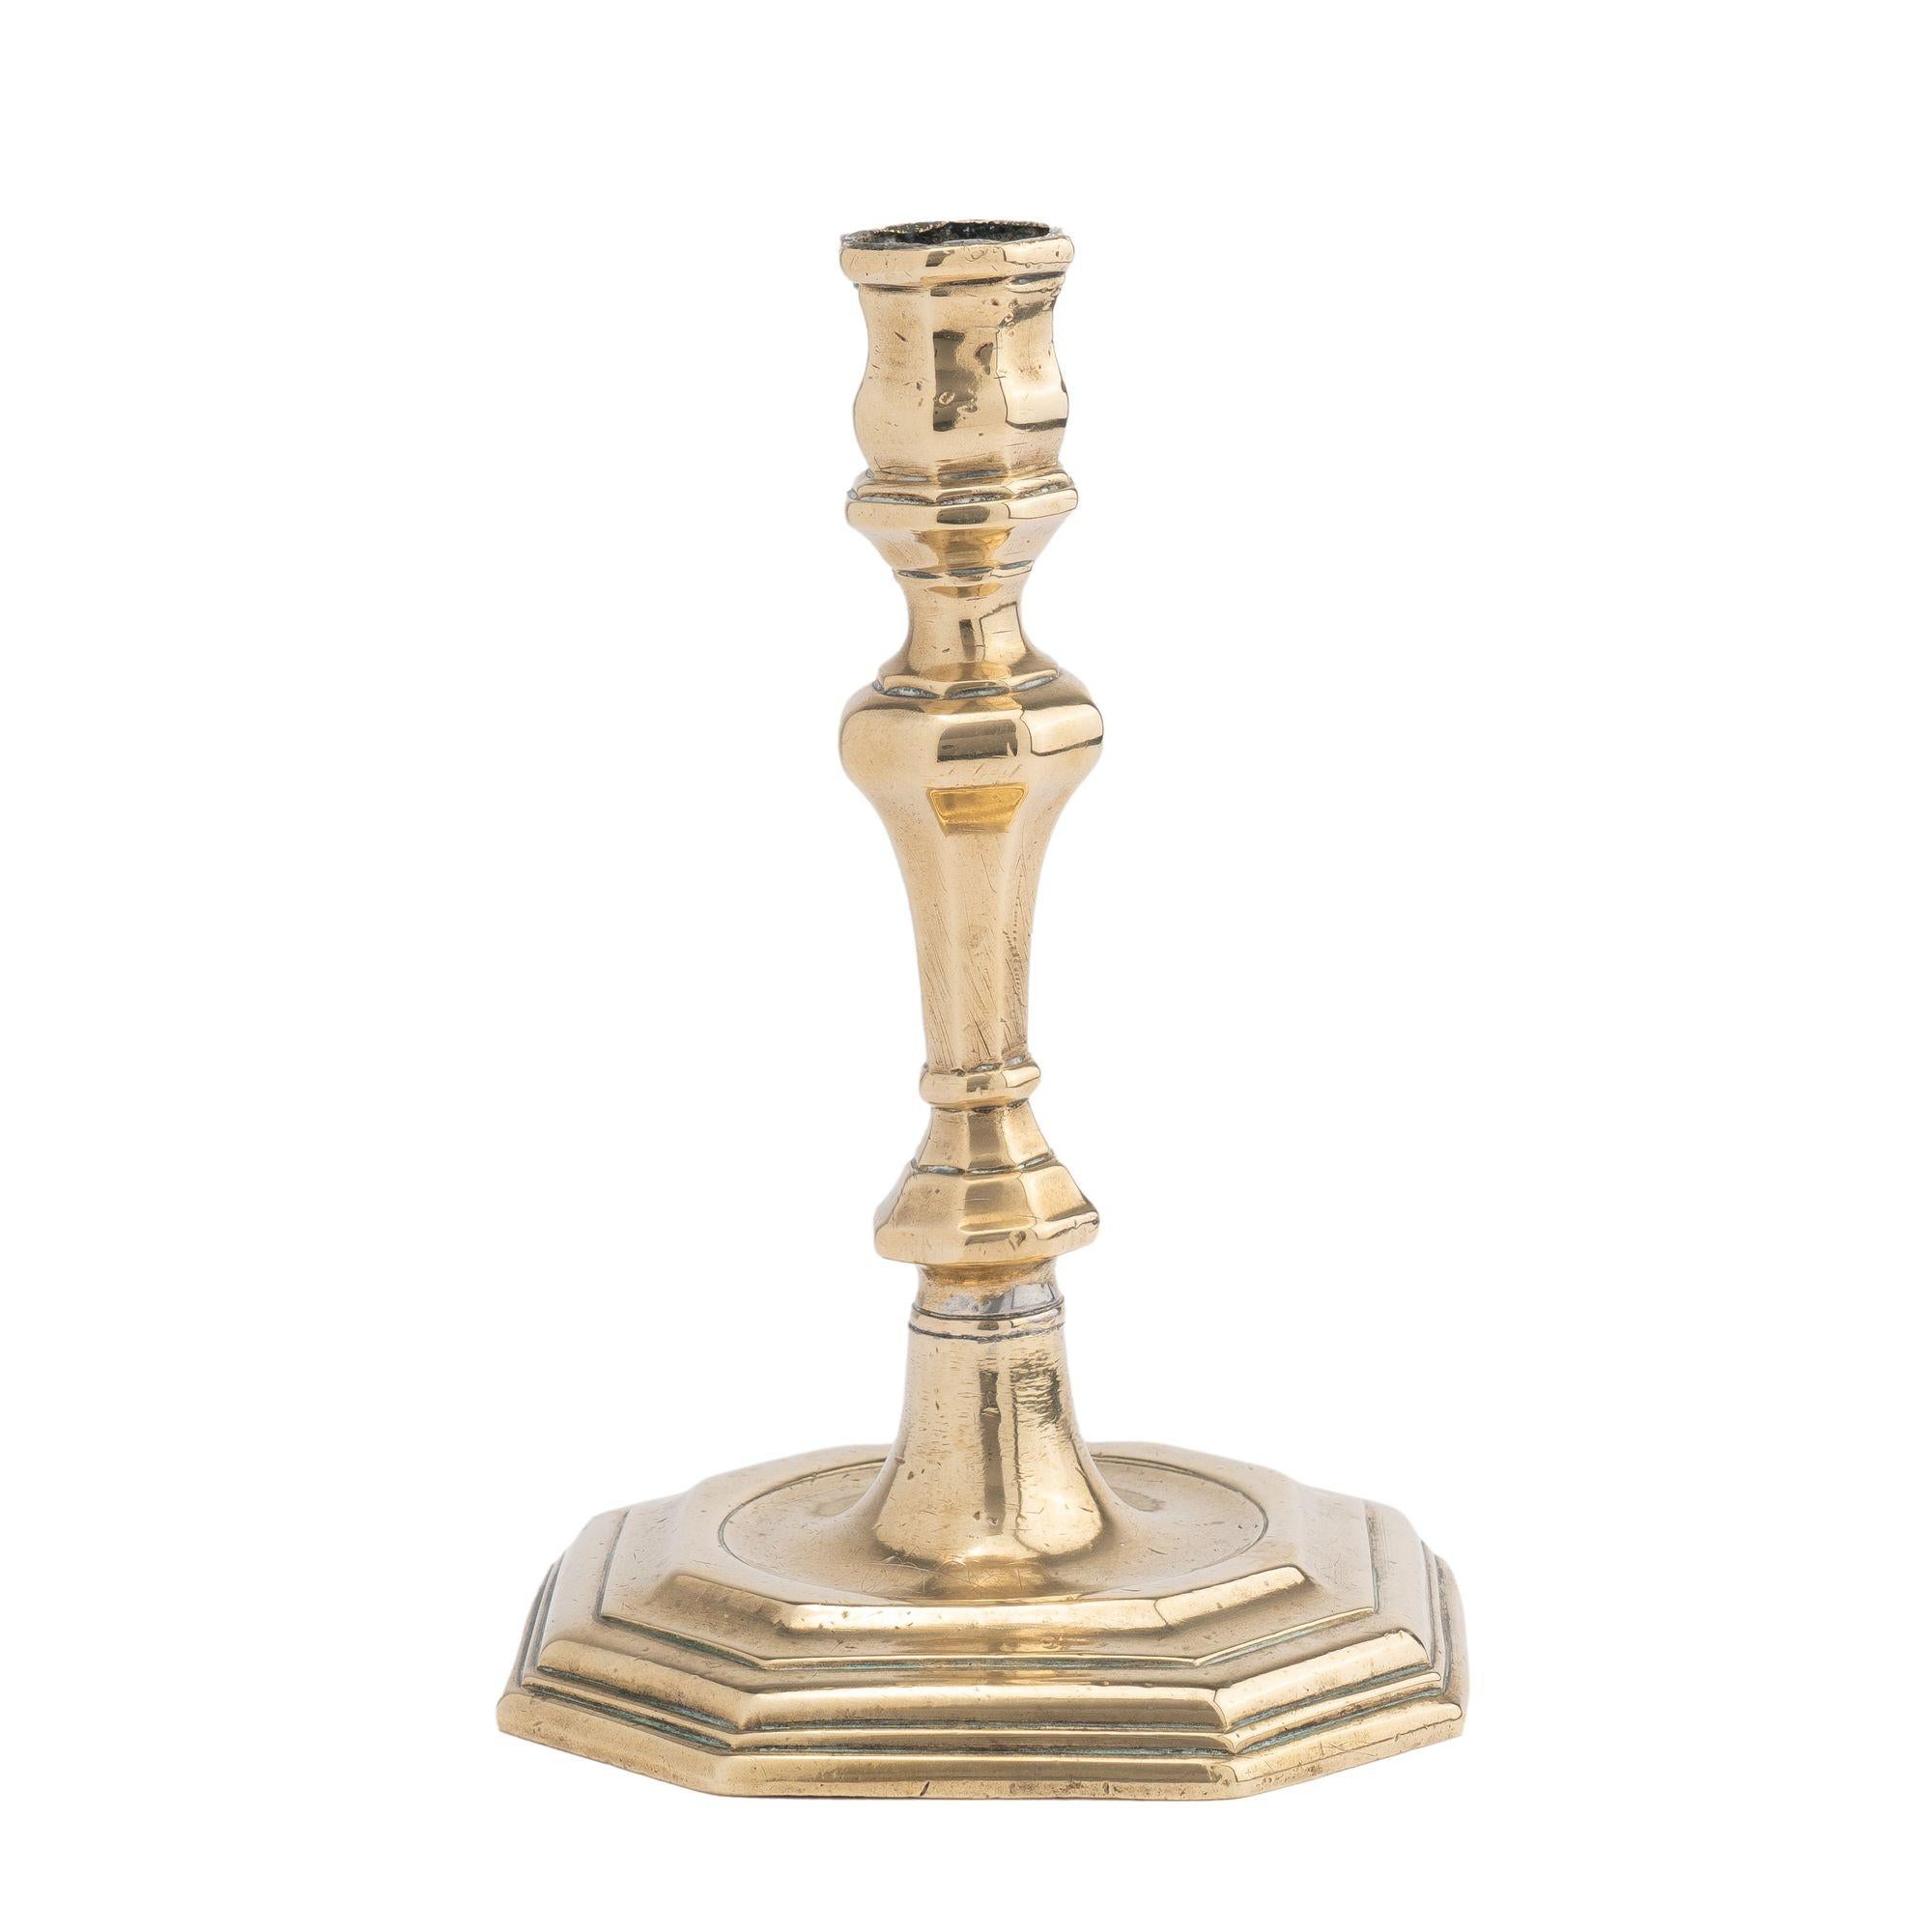 Core cast Queen Anne hexagonal base brass candlestick. The design features a hexagonal candle cup on a waisted pedestal, which sits above an hexagonal trumpet form shaft and suppressed hexagonal knob, peened to the conical center element to a